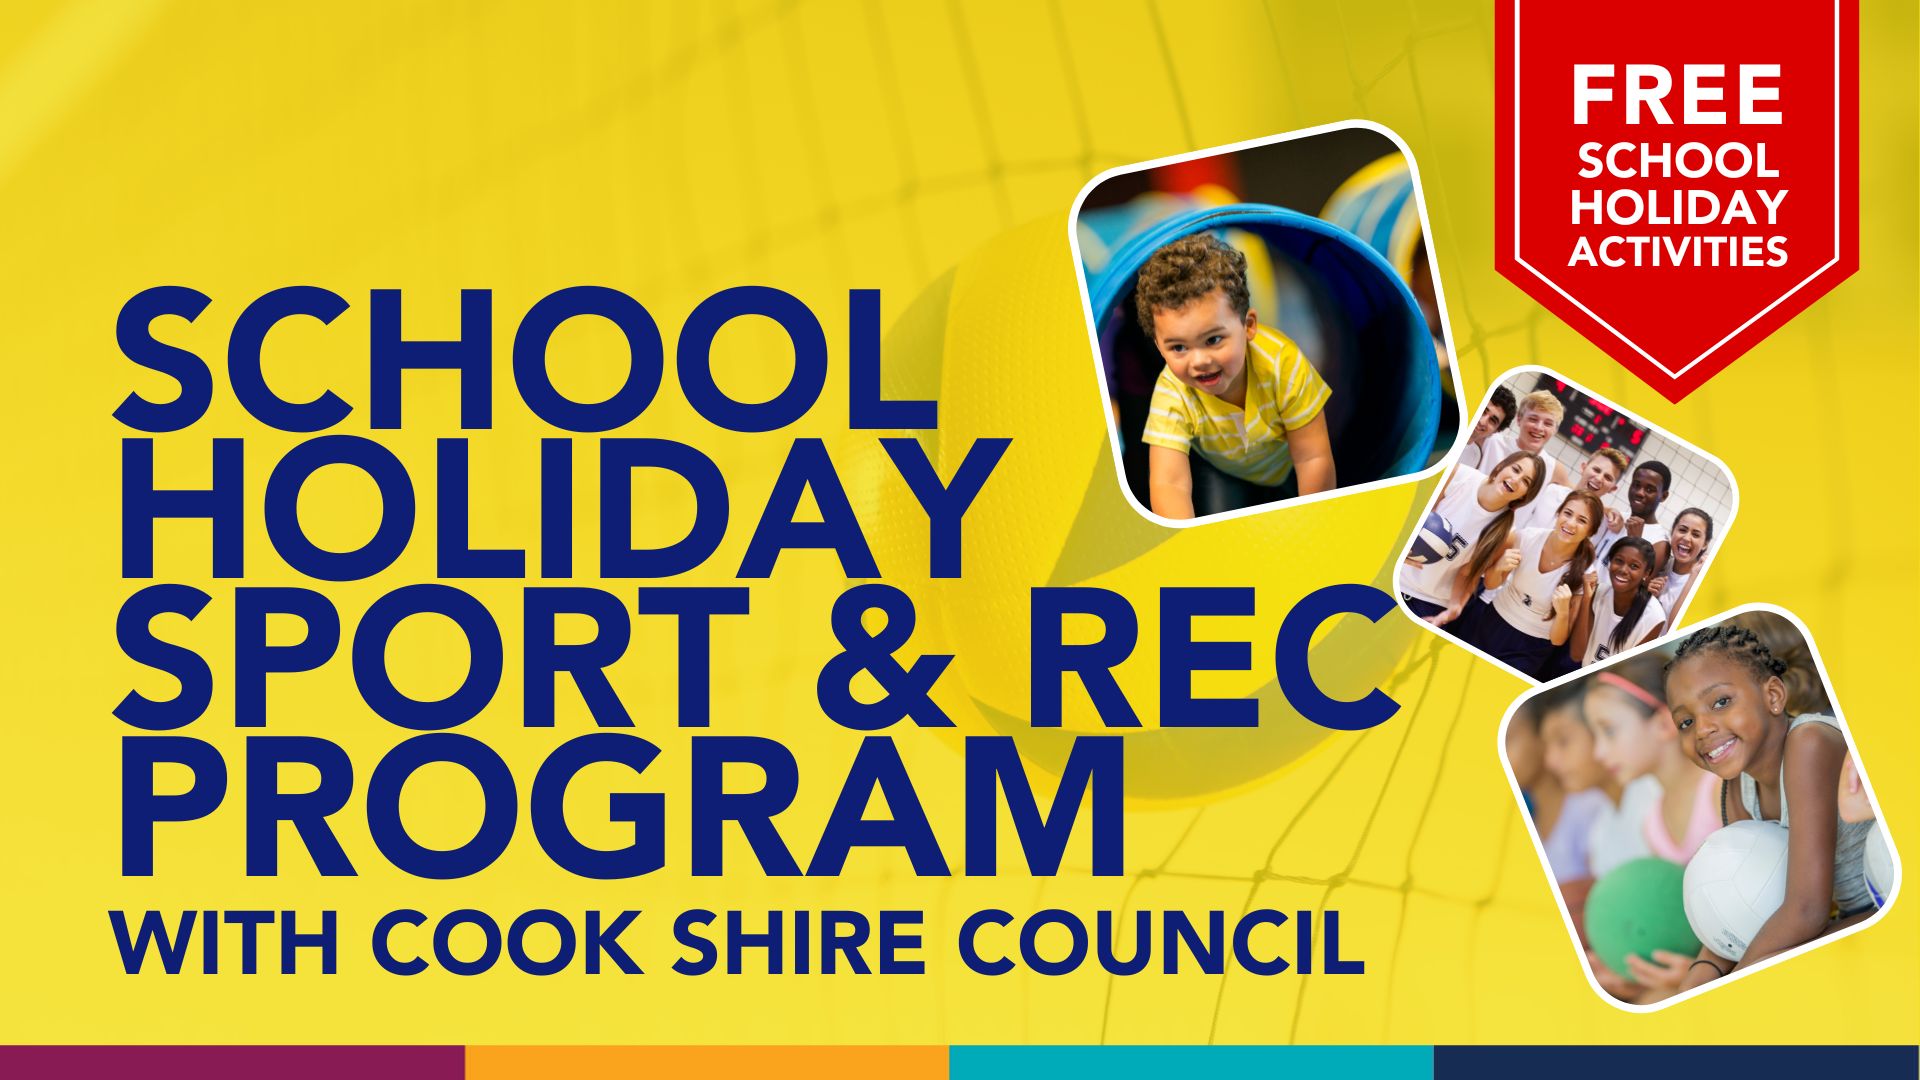 School Holiday Cook Shire Sport and Rec Program with Cook Shire Council